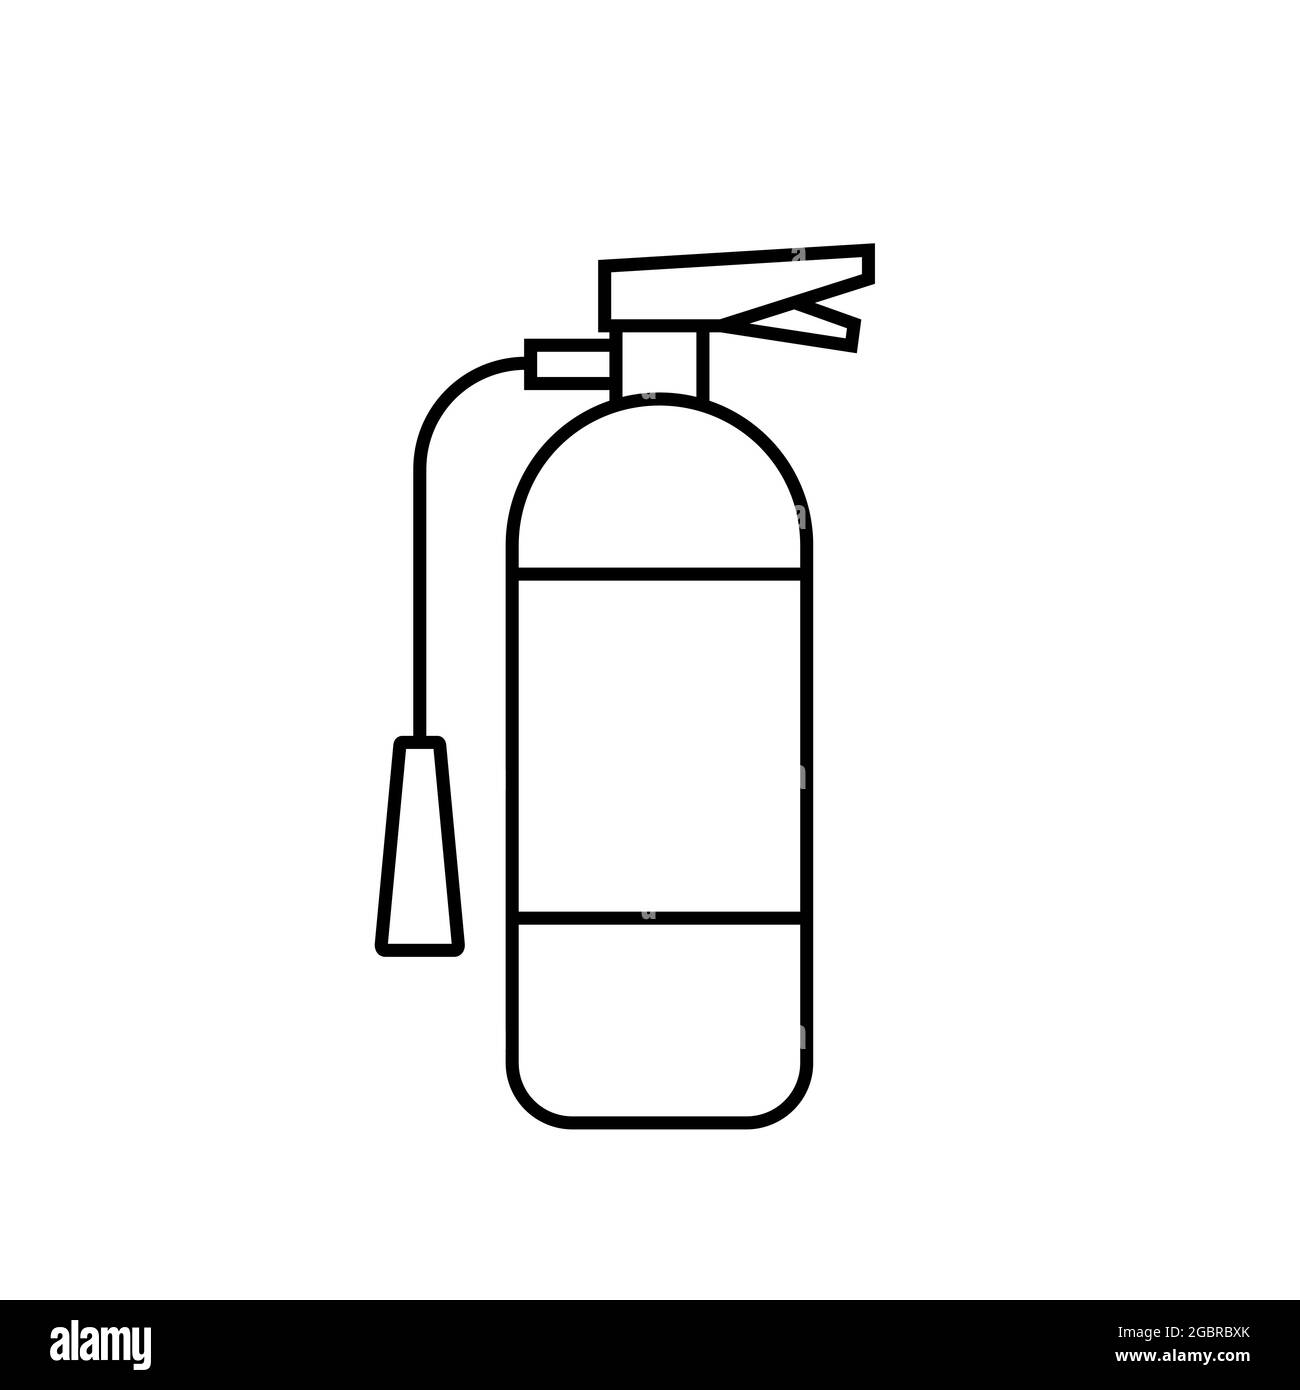 Fire extinguisher line icon. Portable safety equipment element. Active fire protection device used to extinguish or control small fires in emergency Stock Vector